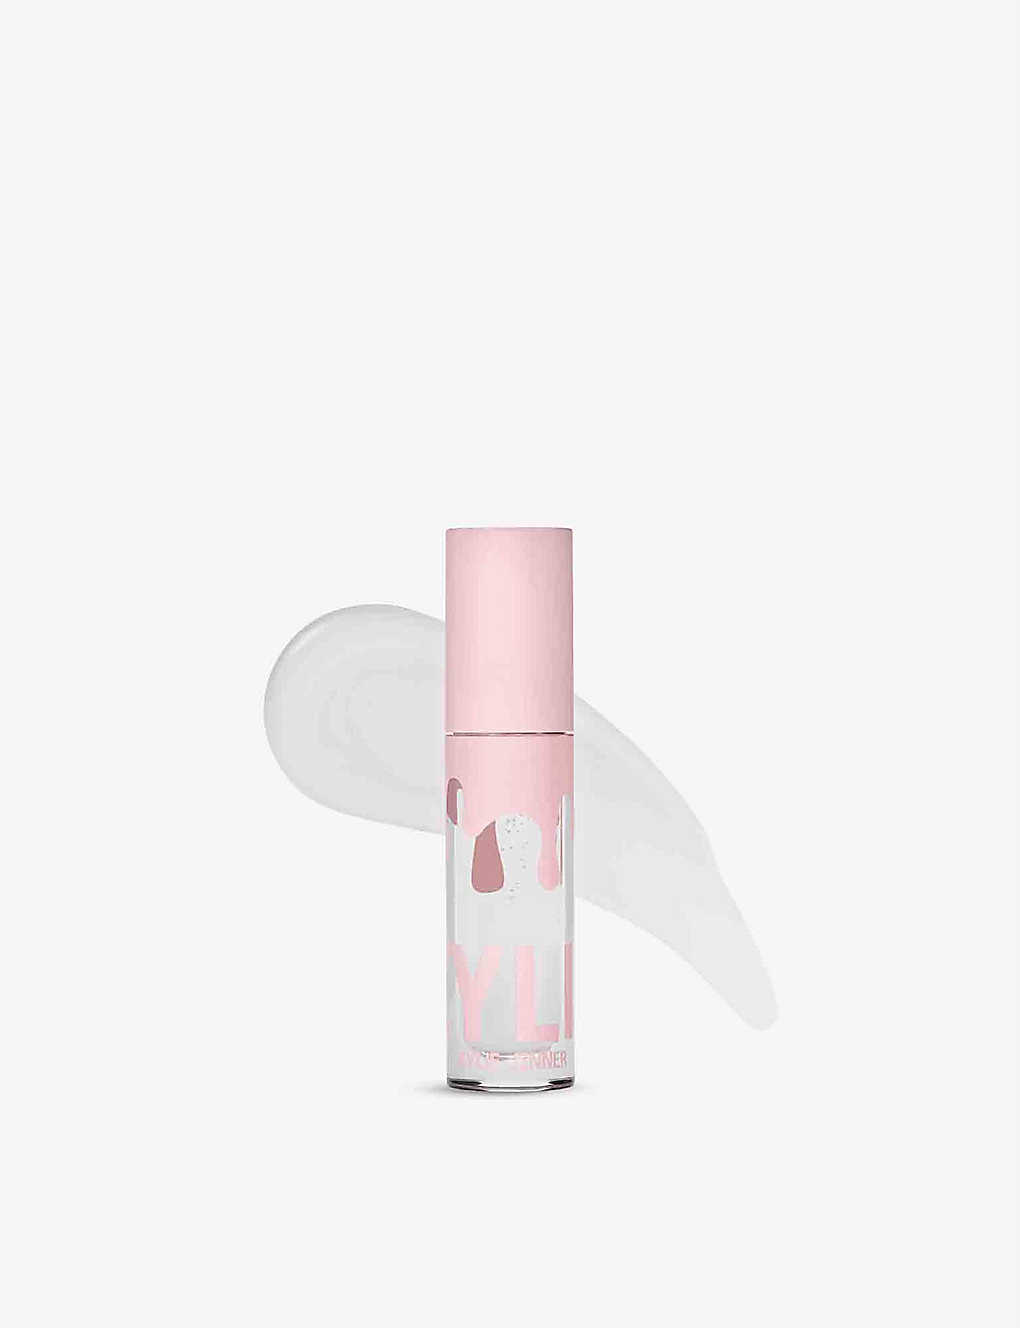 Kylie By Kylie Jenner High Gloss Lip Gloss 3.3ml In 001 Crystal